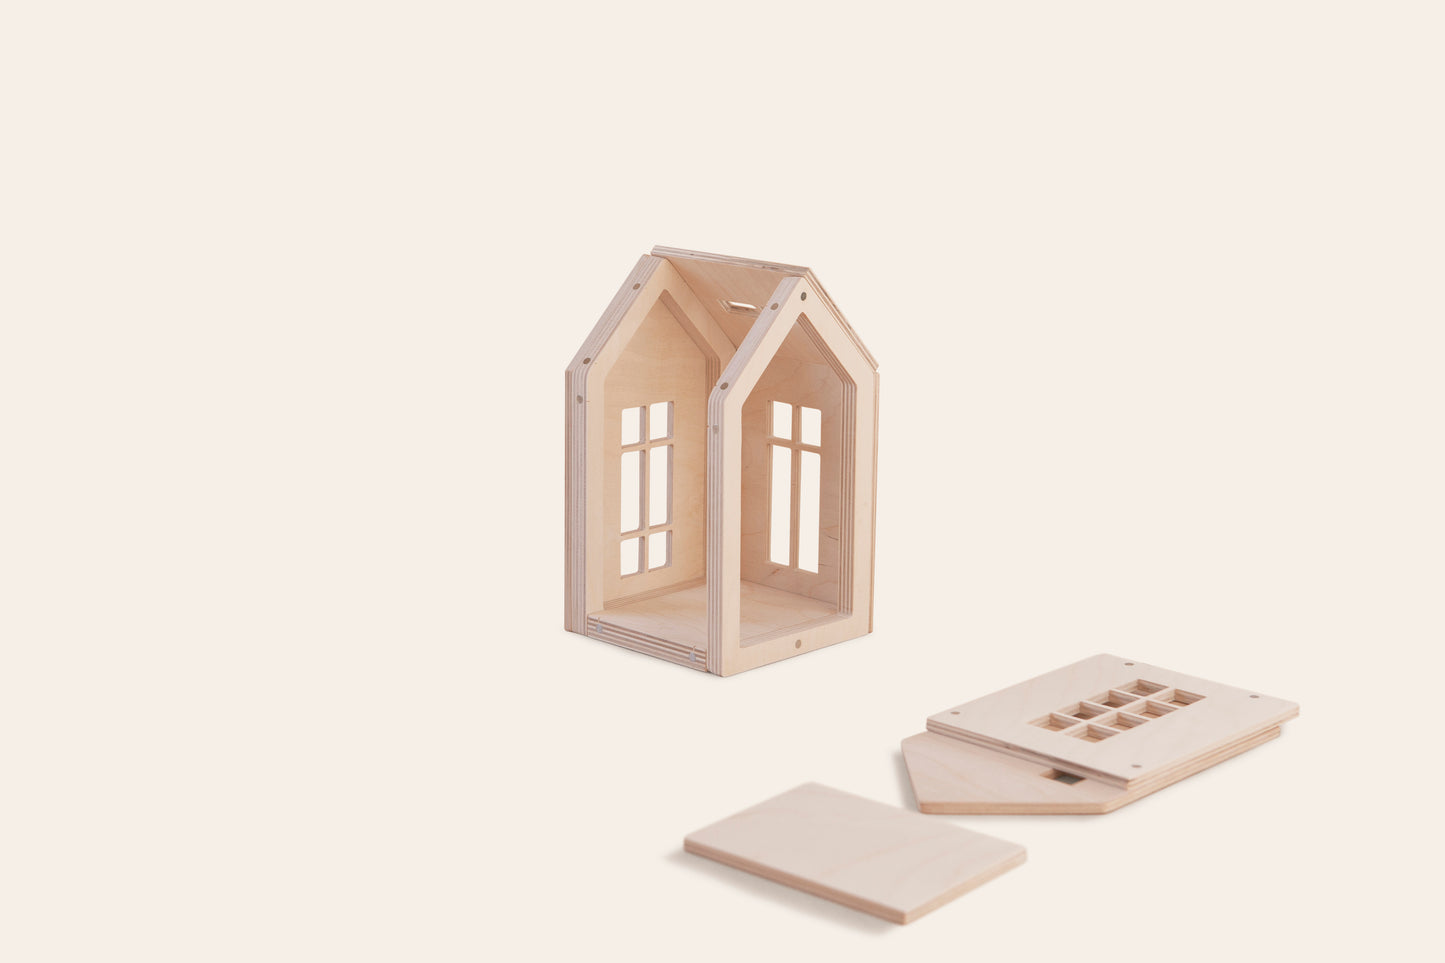 Magnetic Wooden House - Medium - Little Reef and Friends